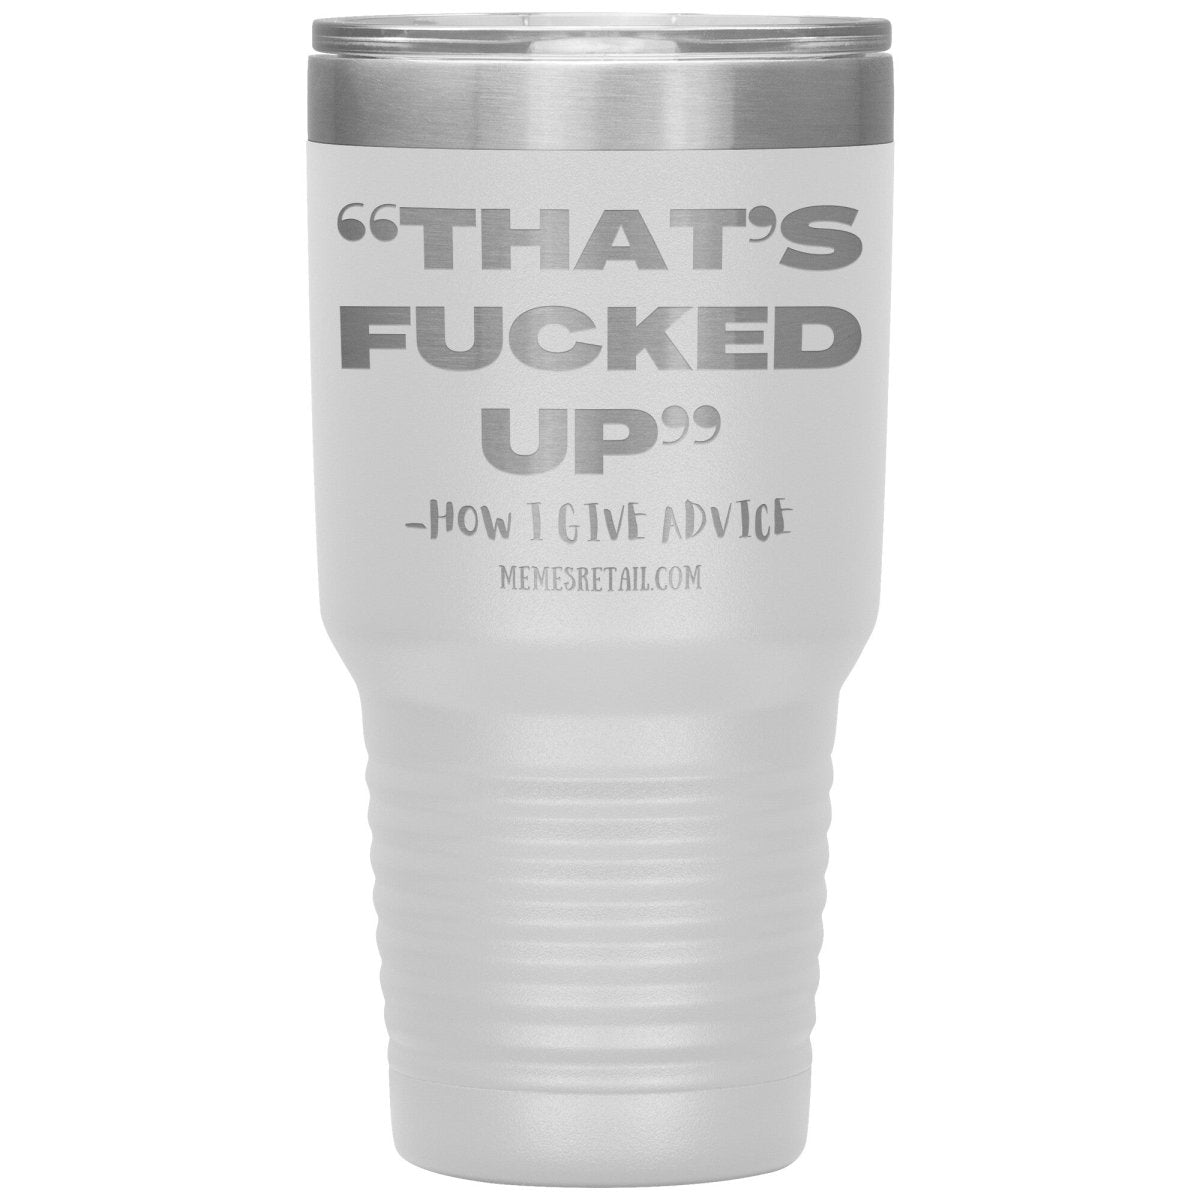 “That’s Fucked Up” -how I give advice Tumblers, 30oz Insulated Tumbler / White - MemesRetail.com